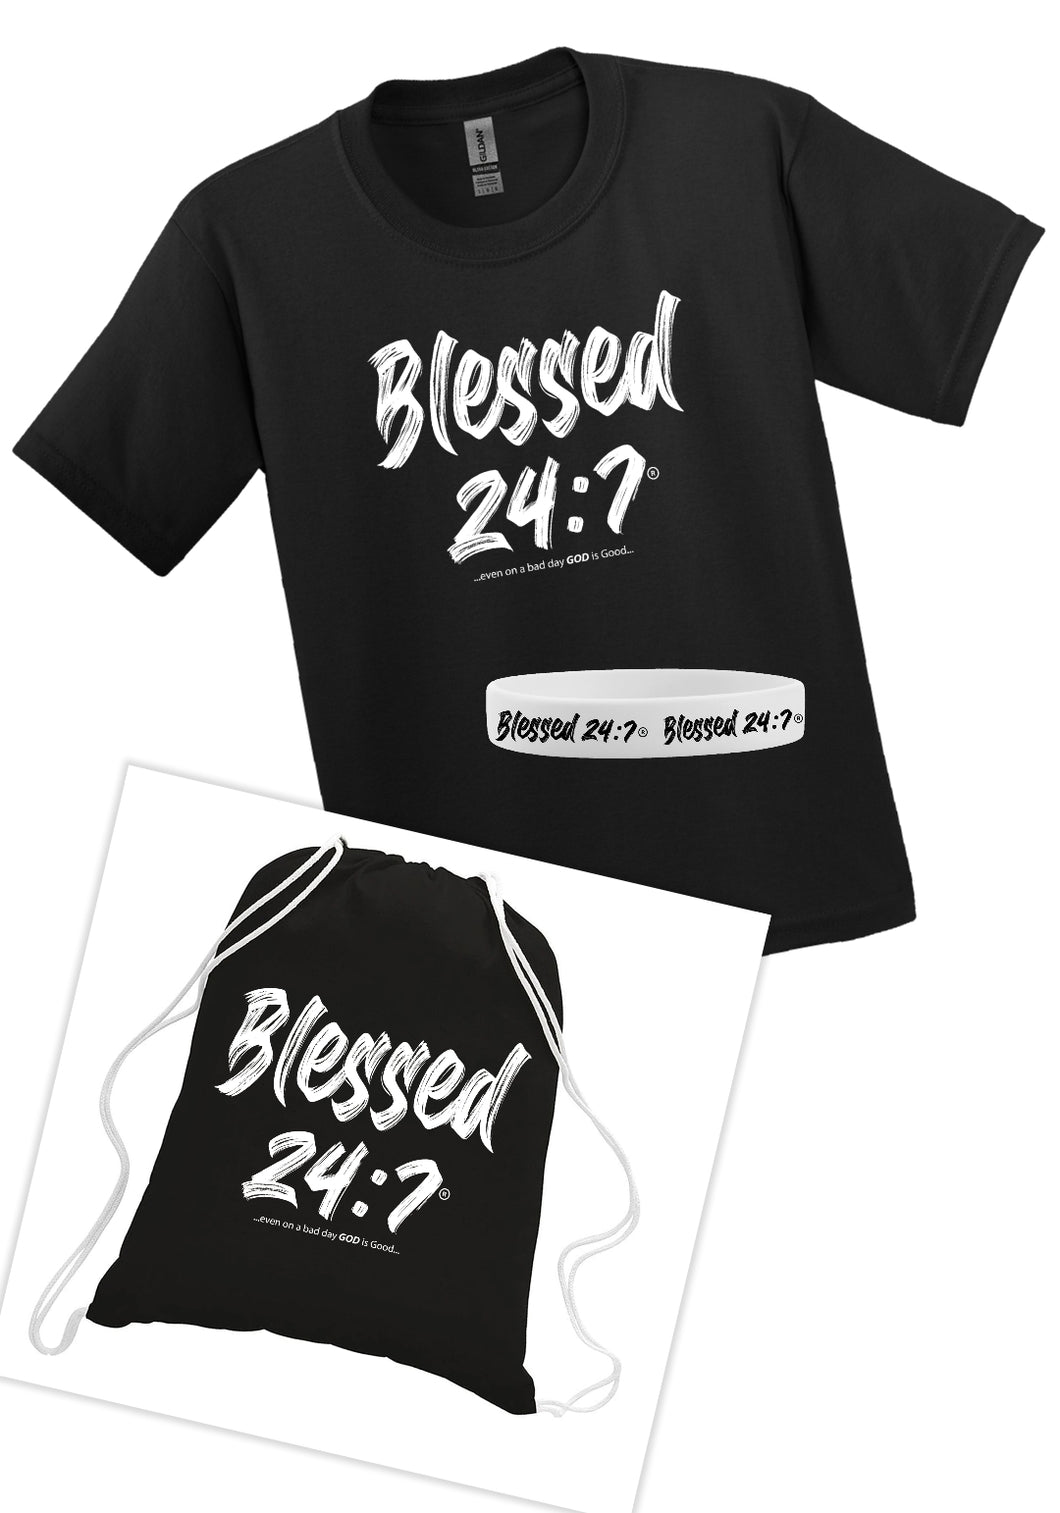 Blessed 24:7 Glow In The Dark T-shirt (YOUTH Package) T-shirt + Wristband + Bag FREE SHIPPING